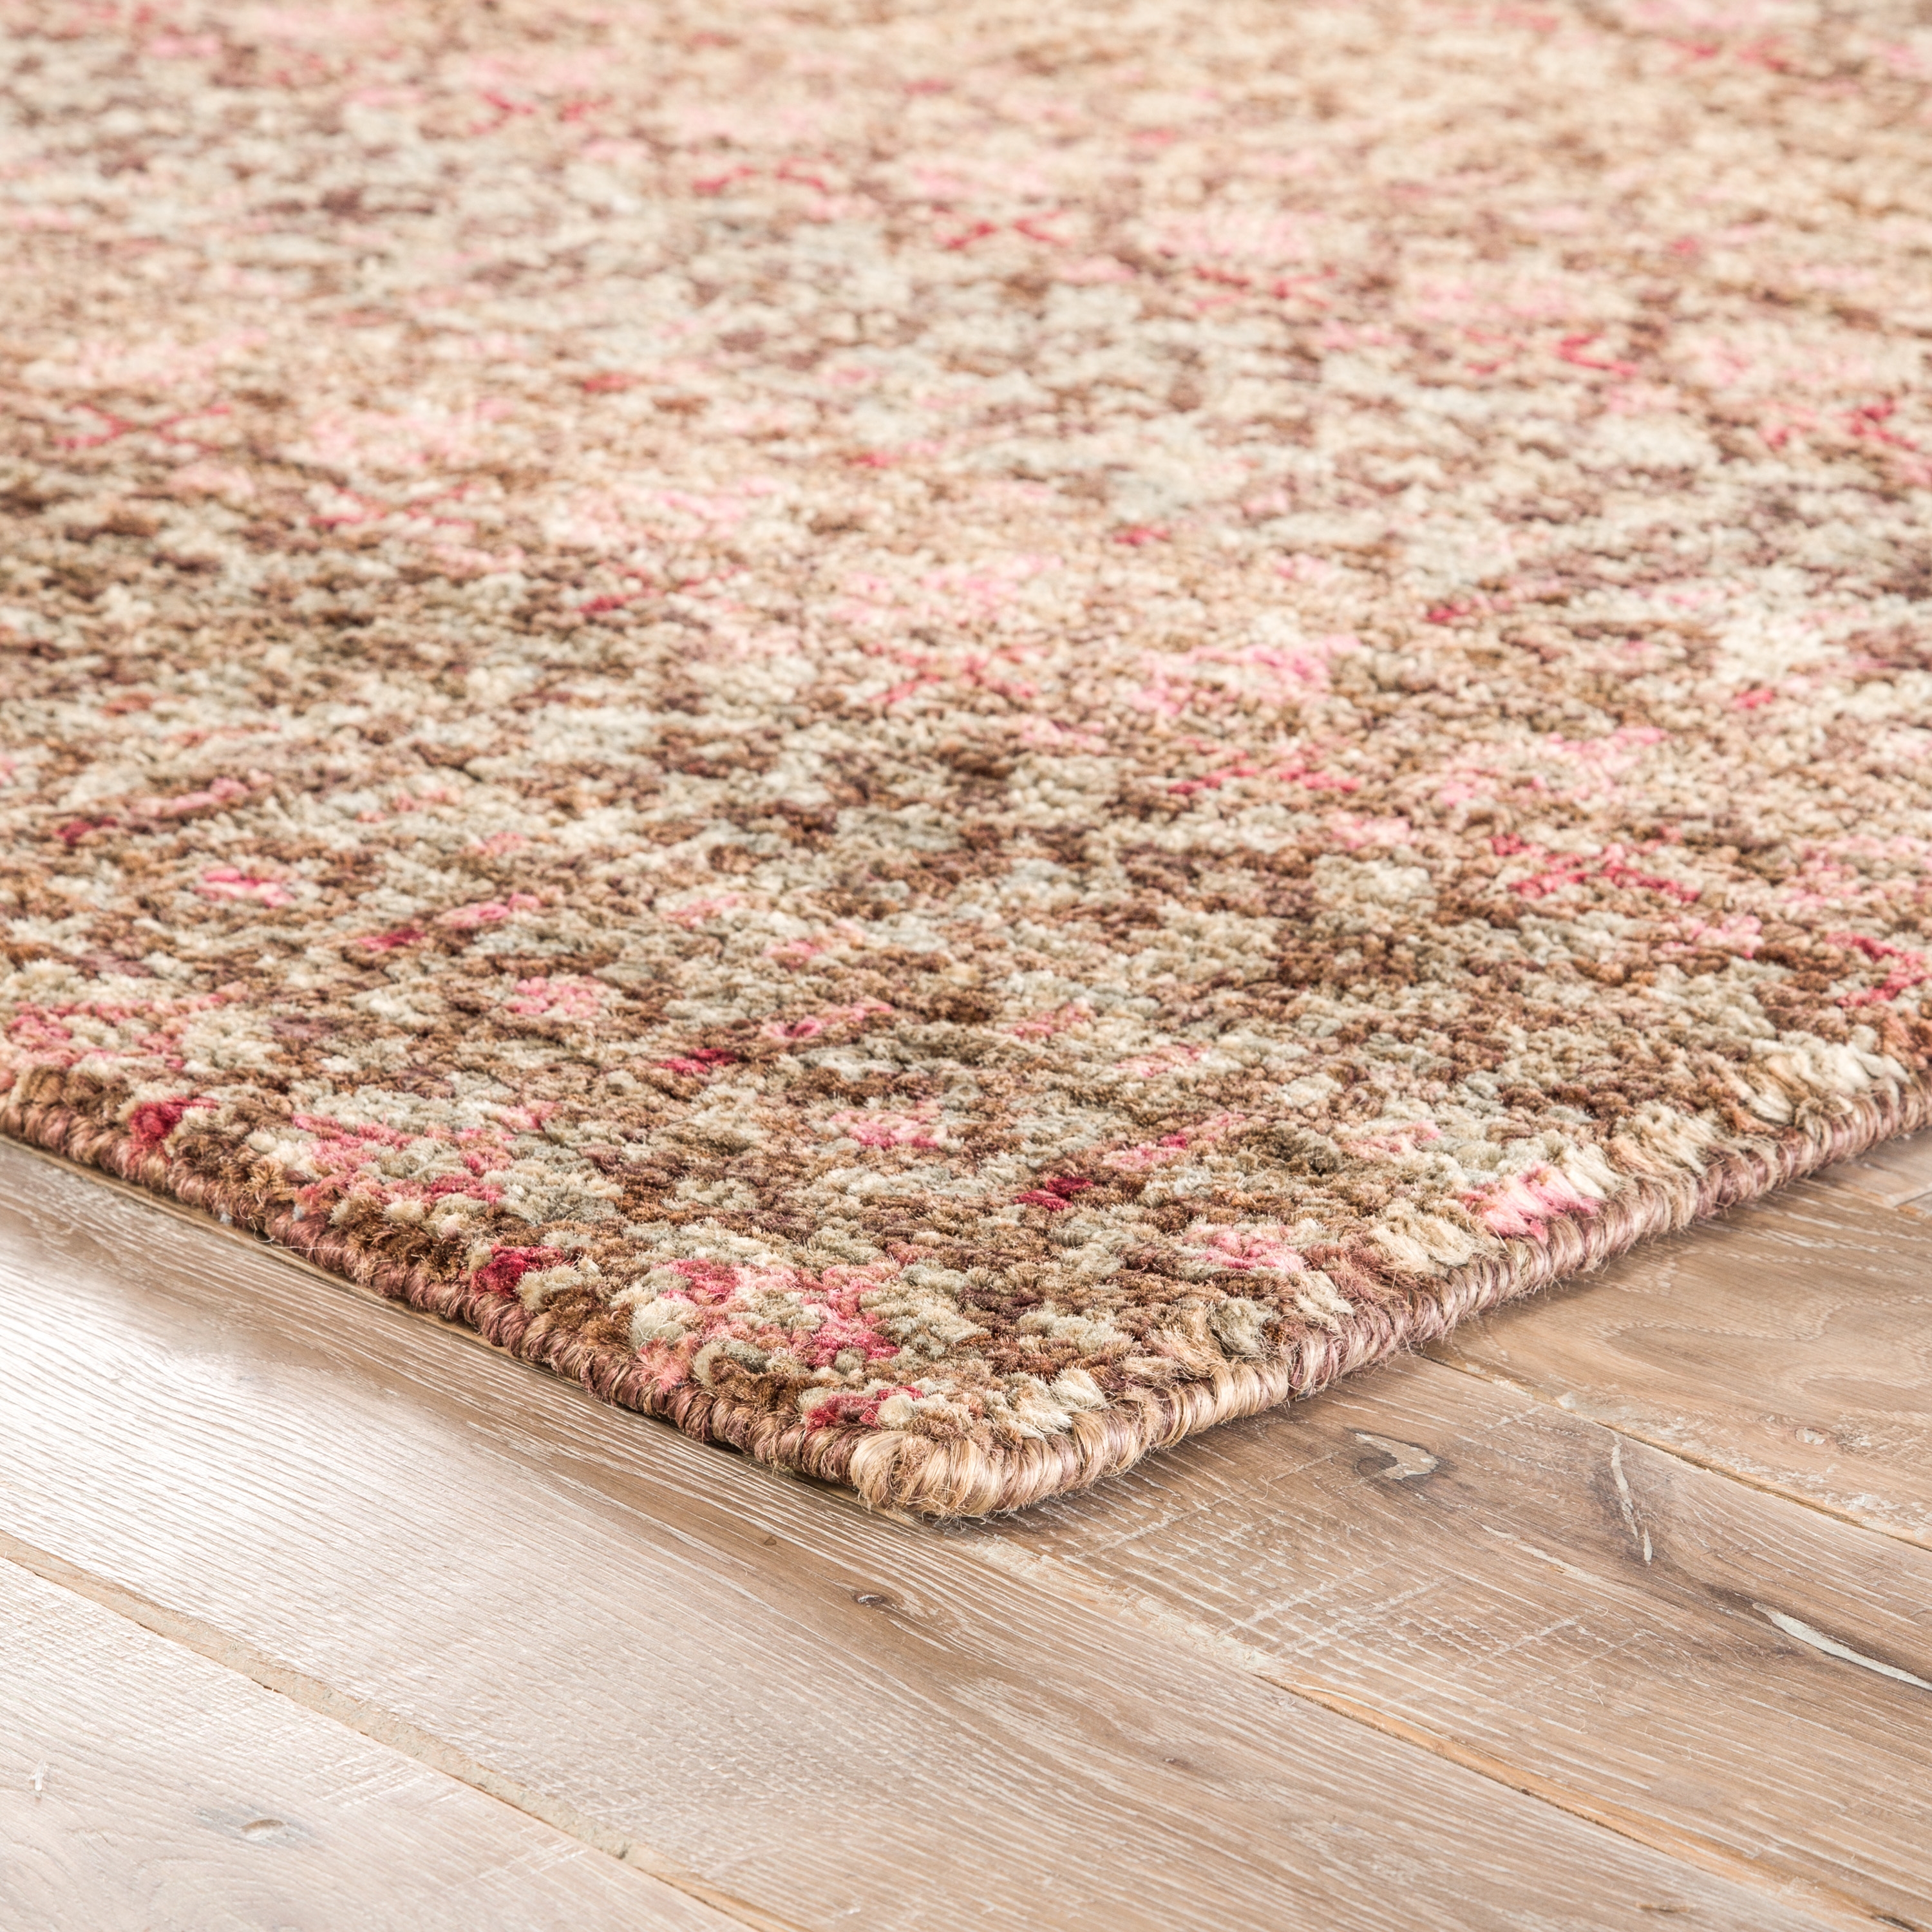 Cane Hand-Knotted Geometric Brown/ Red Area Rug (9' X 13') - Image 1